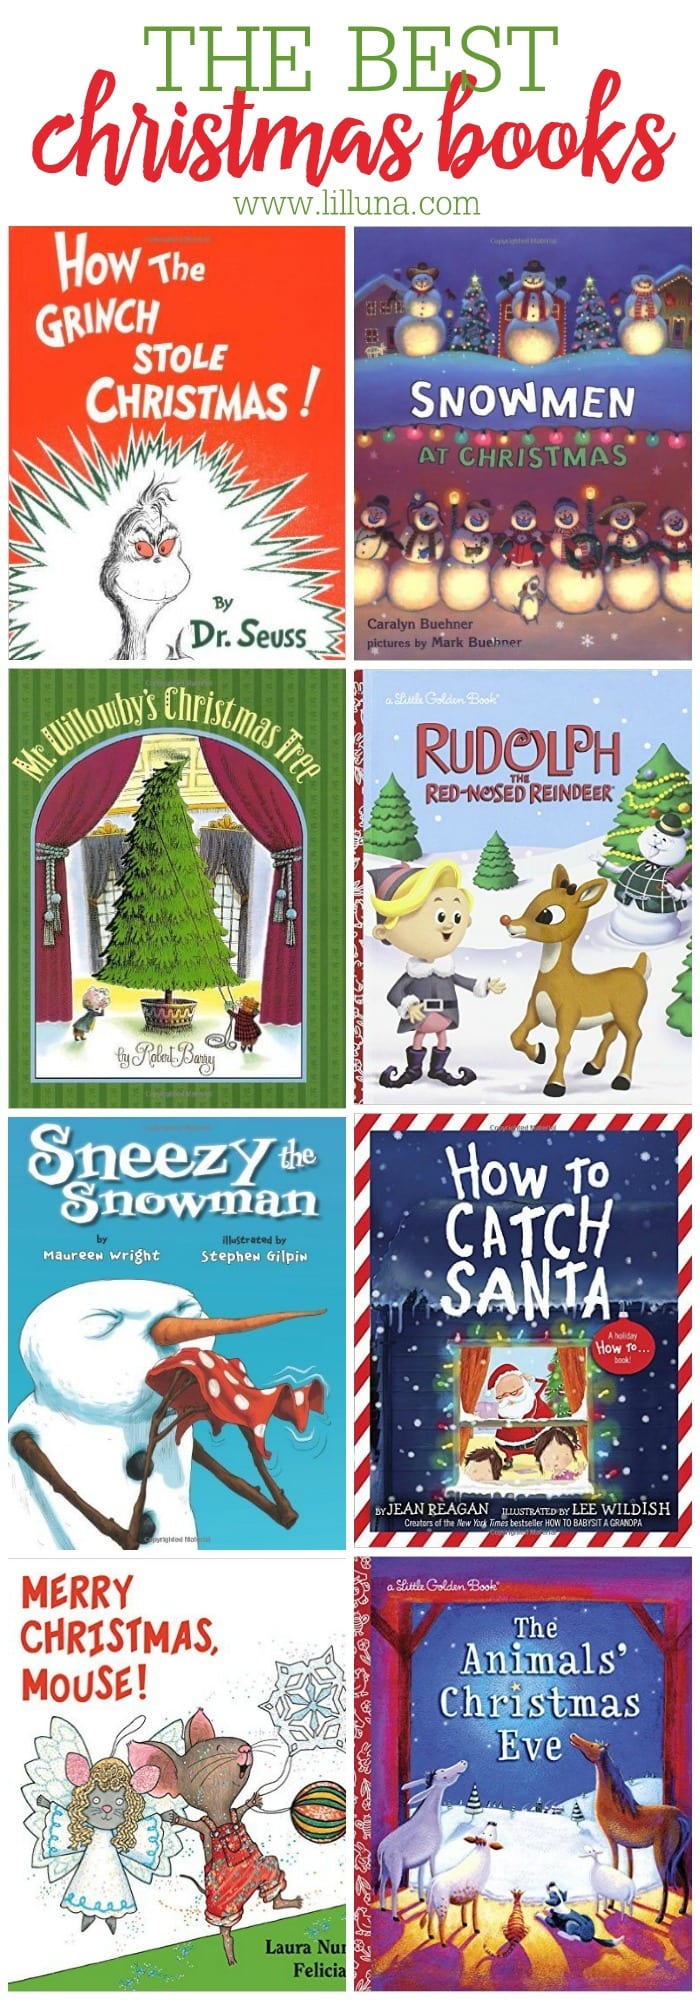 The BEST Christmas Kids Books!! We love wrapping up the books to open and read each day in December!